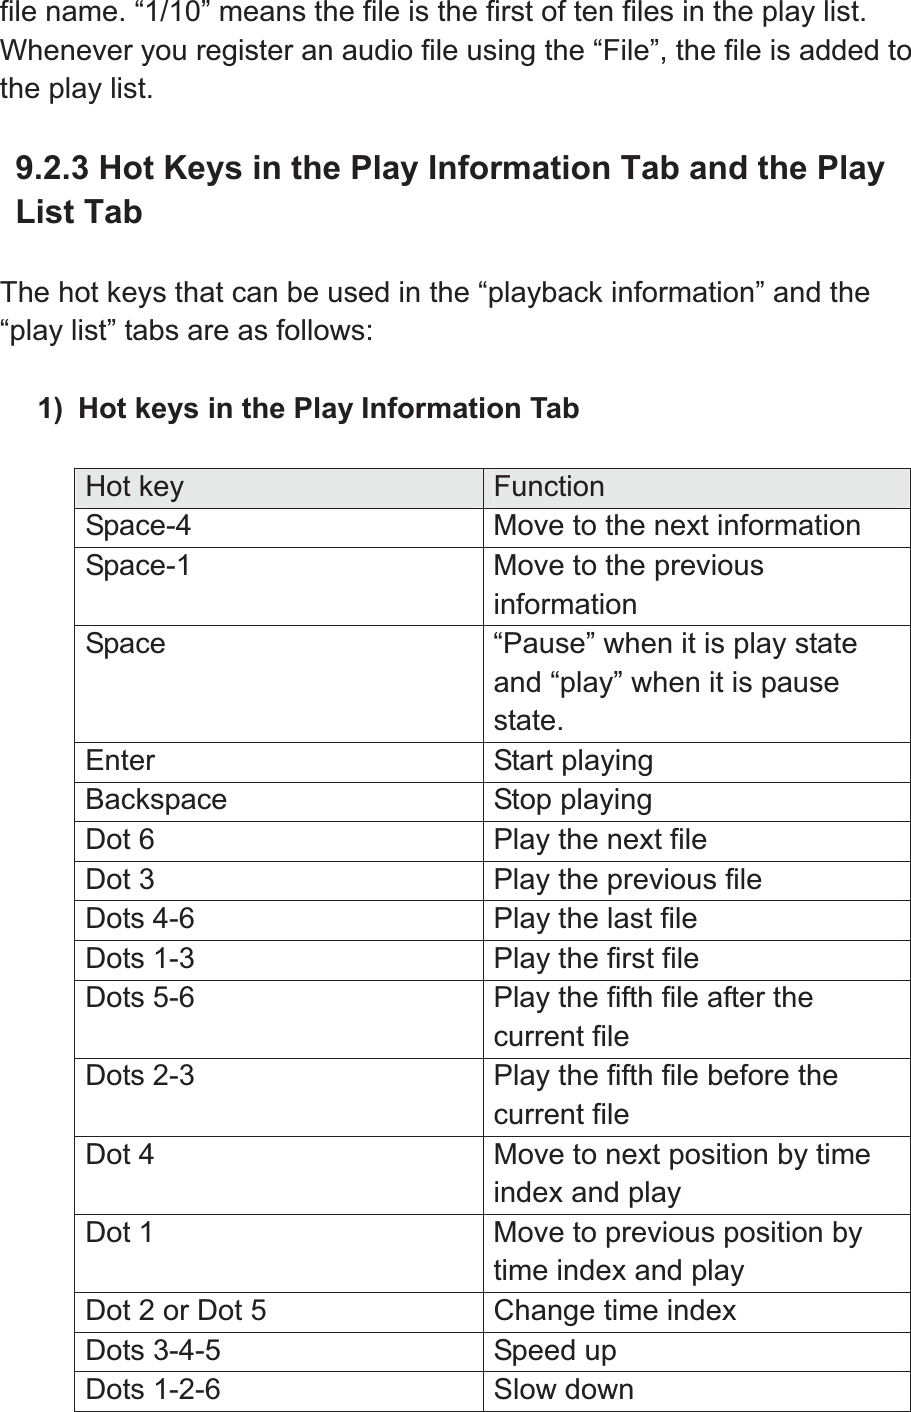 file name. “1/10” means the file is the first of ten files in the play list. Whenever you register an audio file using the “File”, the file is added to the play list. 9.2.3 Hot Keys in the Play Information Tab and the Play List Tab The hot keys that can be used in the “playback information” and the “play list” tabs are as follows: 1)  Hot keys in the Play Information Tab Hot key  FunctionSpace-4  Move to the next information Space-1  Move to the previous information Space  “Pause” when it is play state and “play” when it is pause state. Enter Start playing Backspace Stop playing Dot 6  Play the next file Dot 3  Play the previous file Dots 4-6  Play the last file Dots 1-3  Play the first file Dots 5-6  Play the fifth file after the current file Dots 2-3  Play the fifth file before the current file Dot 4  Move to next position by time index and play Dot 1  Move to previous position by time index and play Dot 2 or Dot 5  Change time index Dots 3-4-5  Speed up Dots 1-2-6  Slow down 